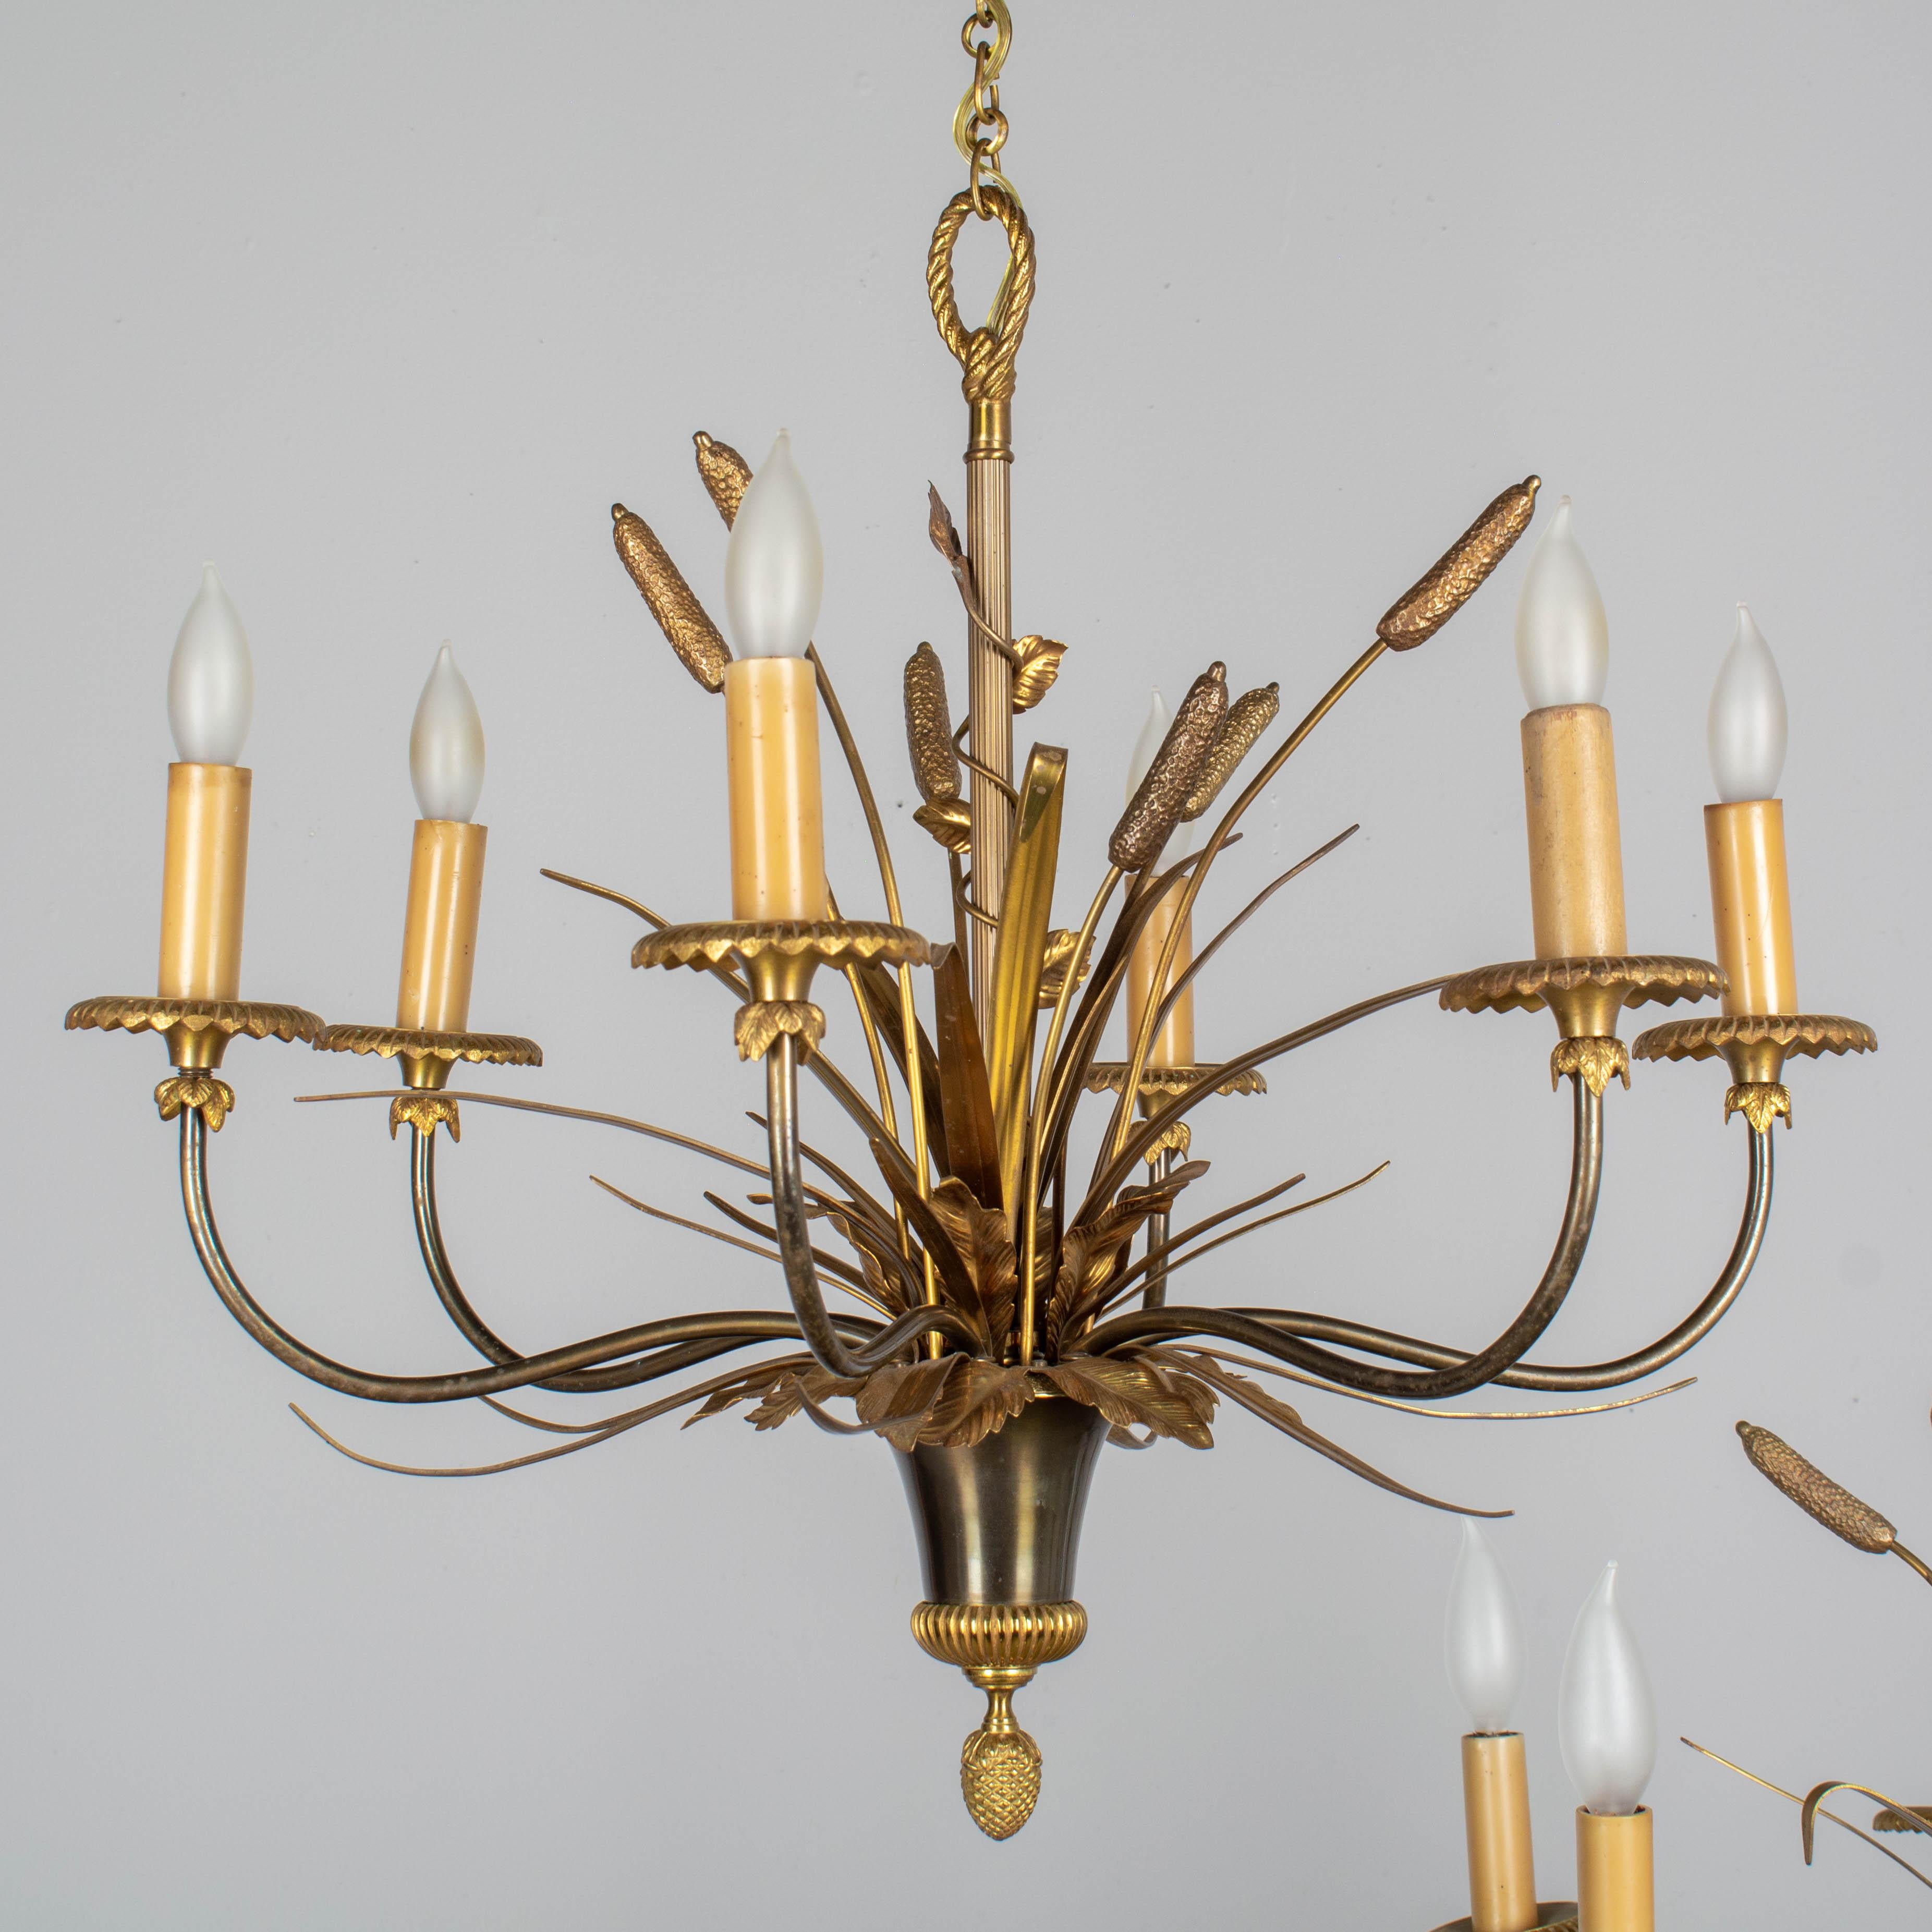 A pair of French Maison Charles doré bronze and patinated brass six-light chandeliers. Exceptional craftsmanship with fine details including six cattail stems with long brass leaves. The arms and coupelle have a darker bronze patina that provides